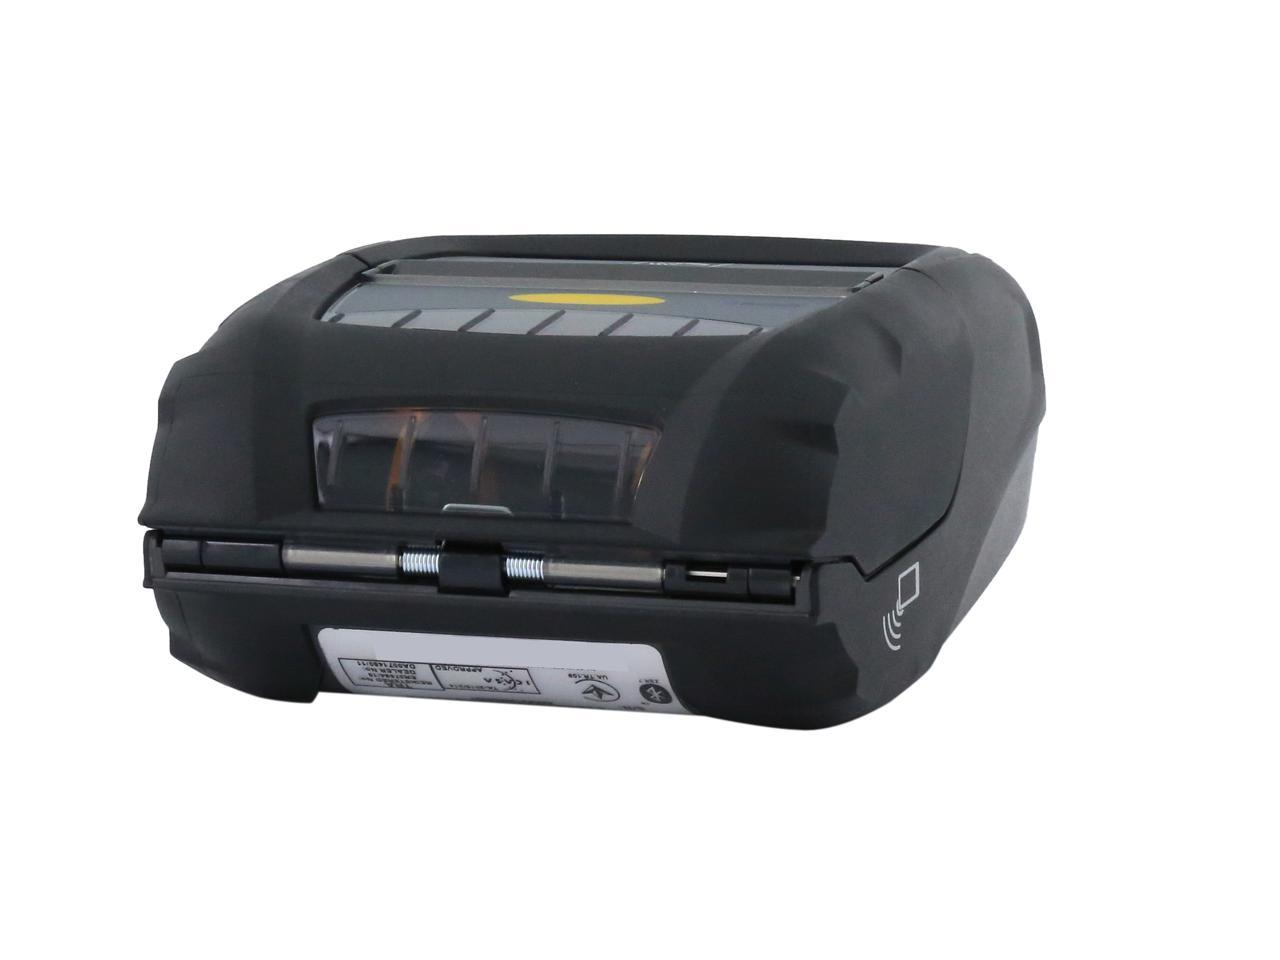 Zebra Zq510 3 Mobile Direct Thermal Receipt And Label Printer 203 Dpi Bluetooth 40 Linered 8950